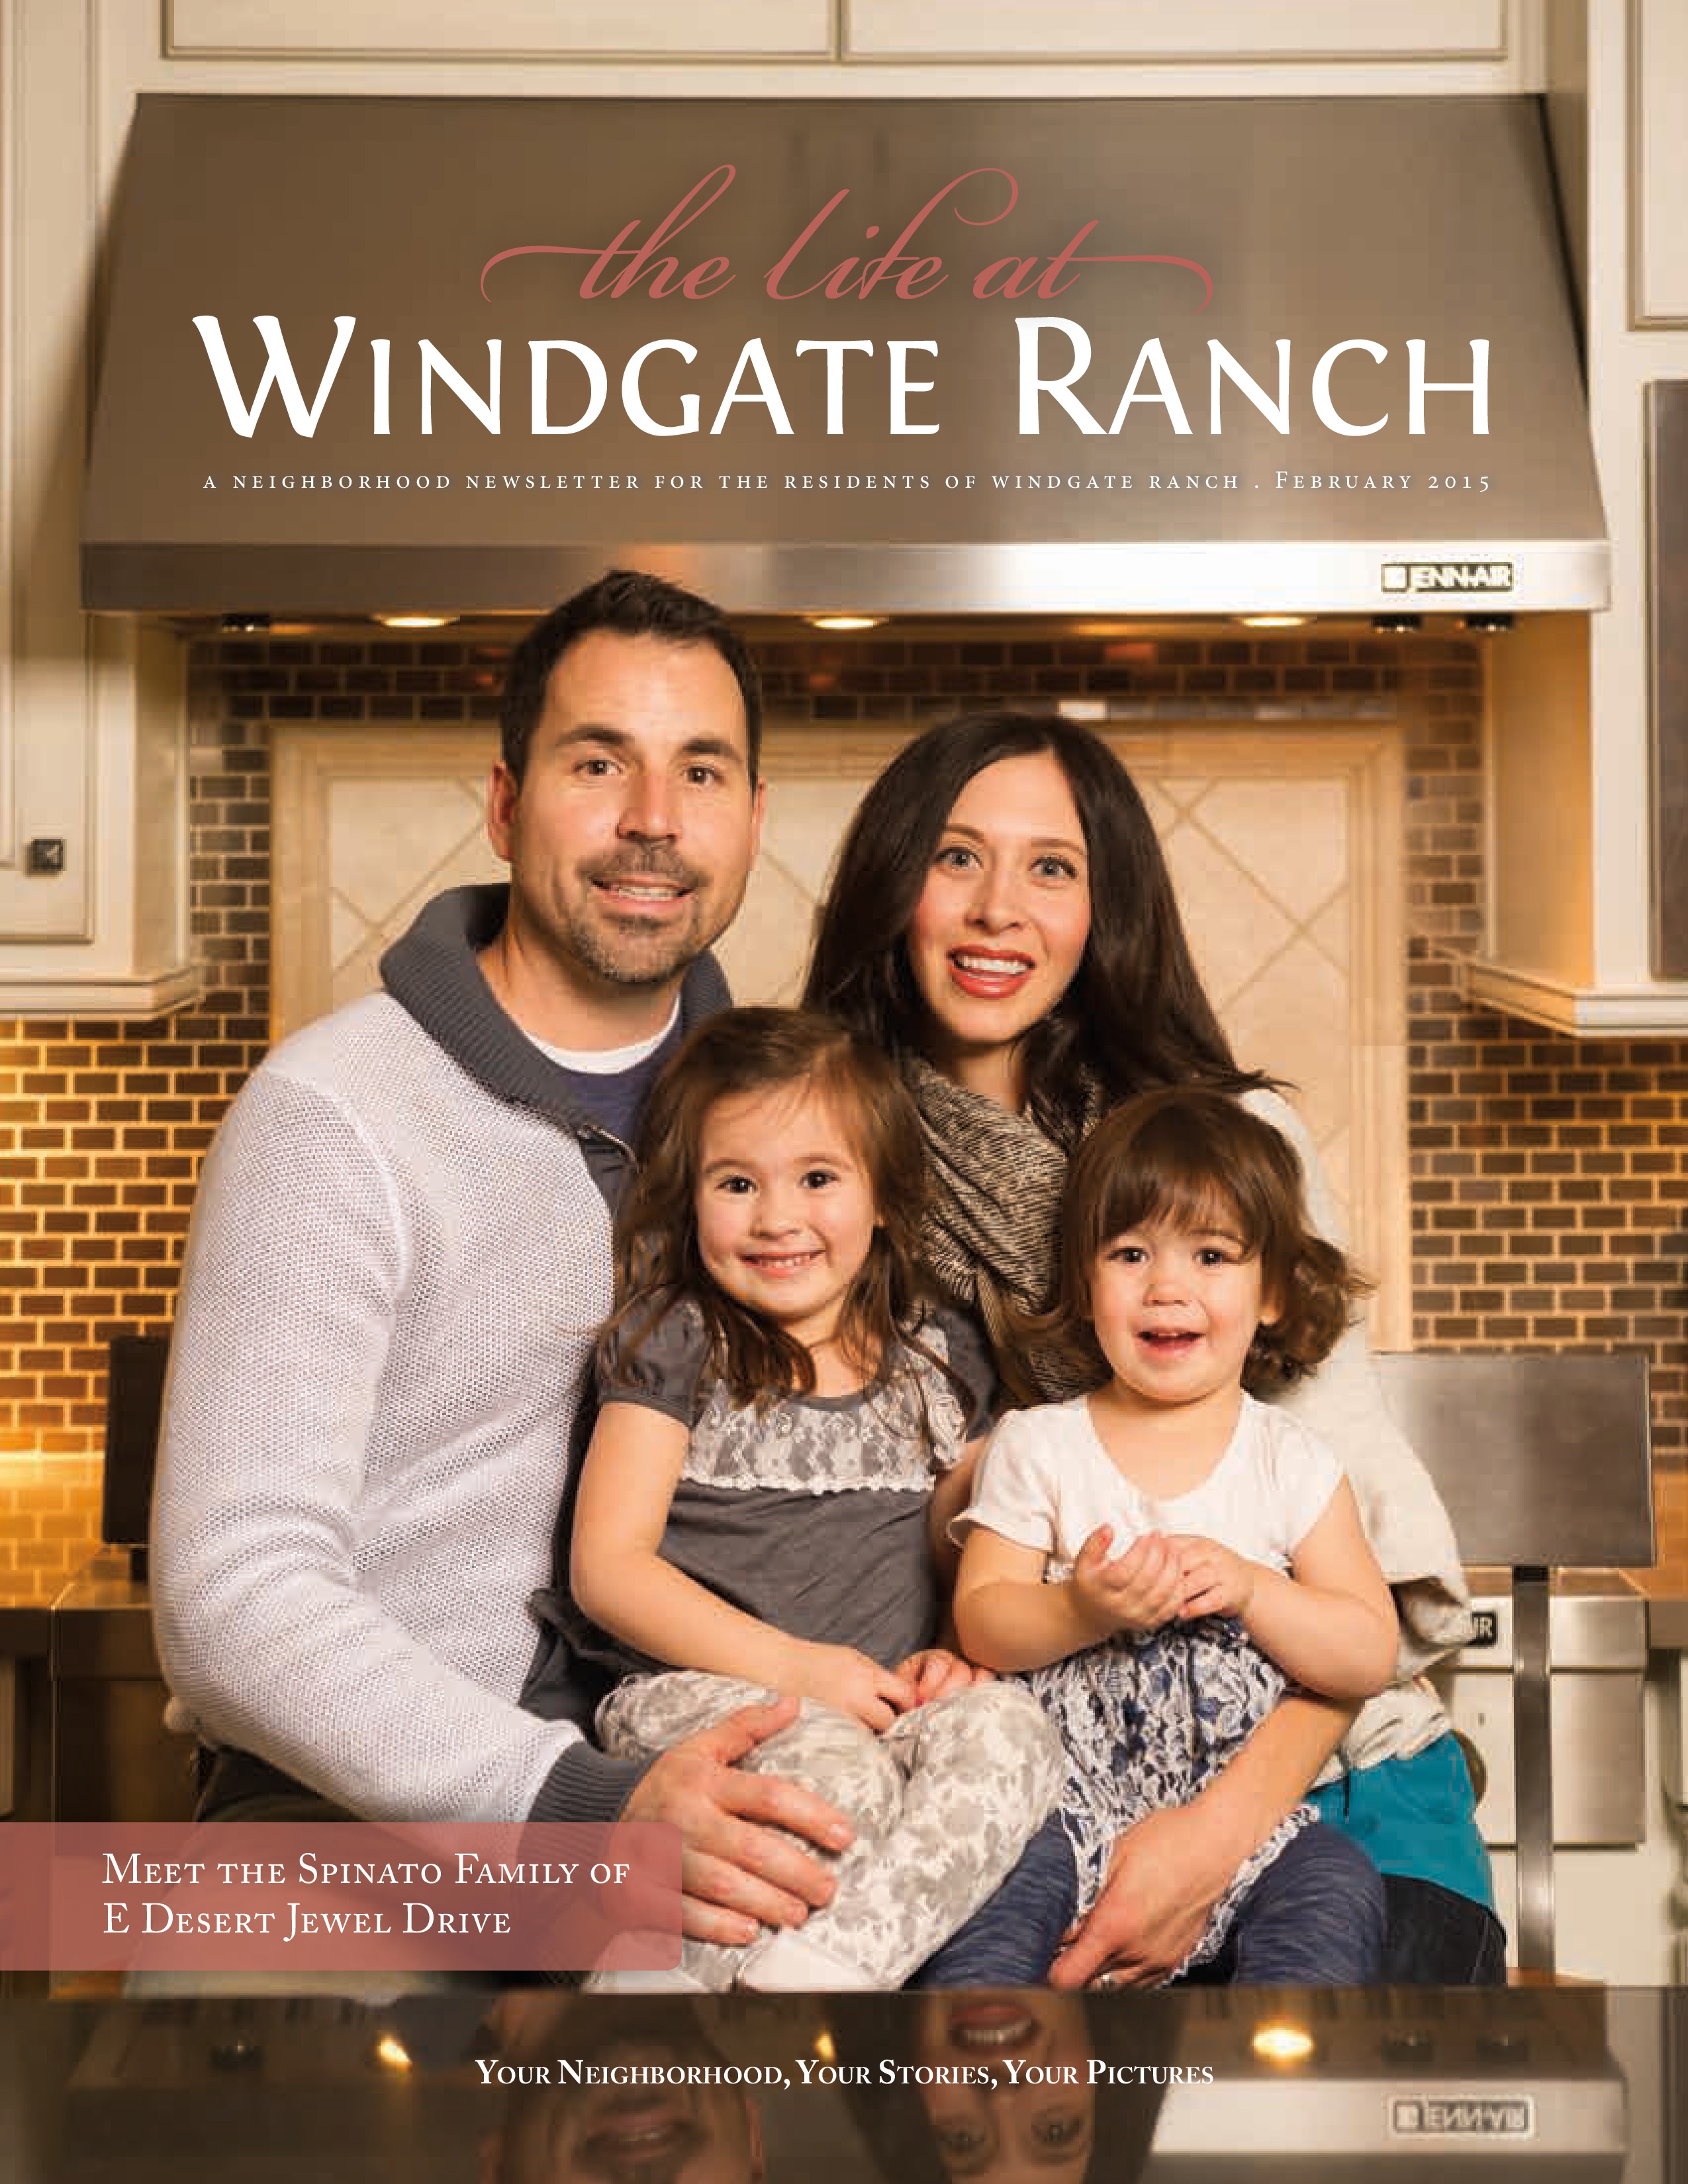 The Life at Windgate Ranch